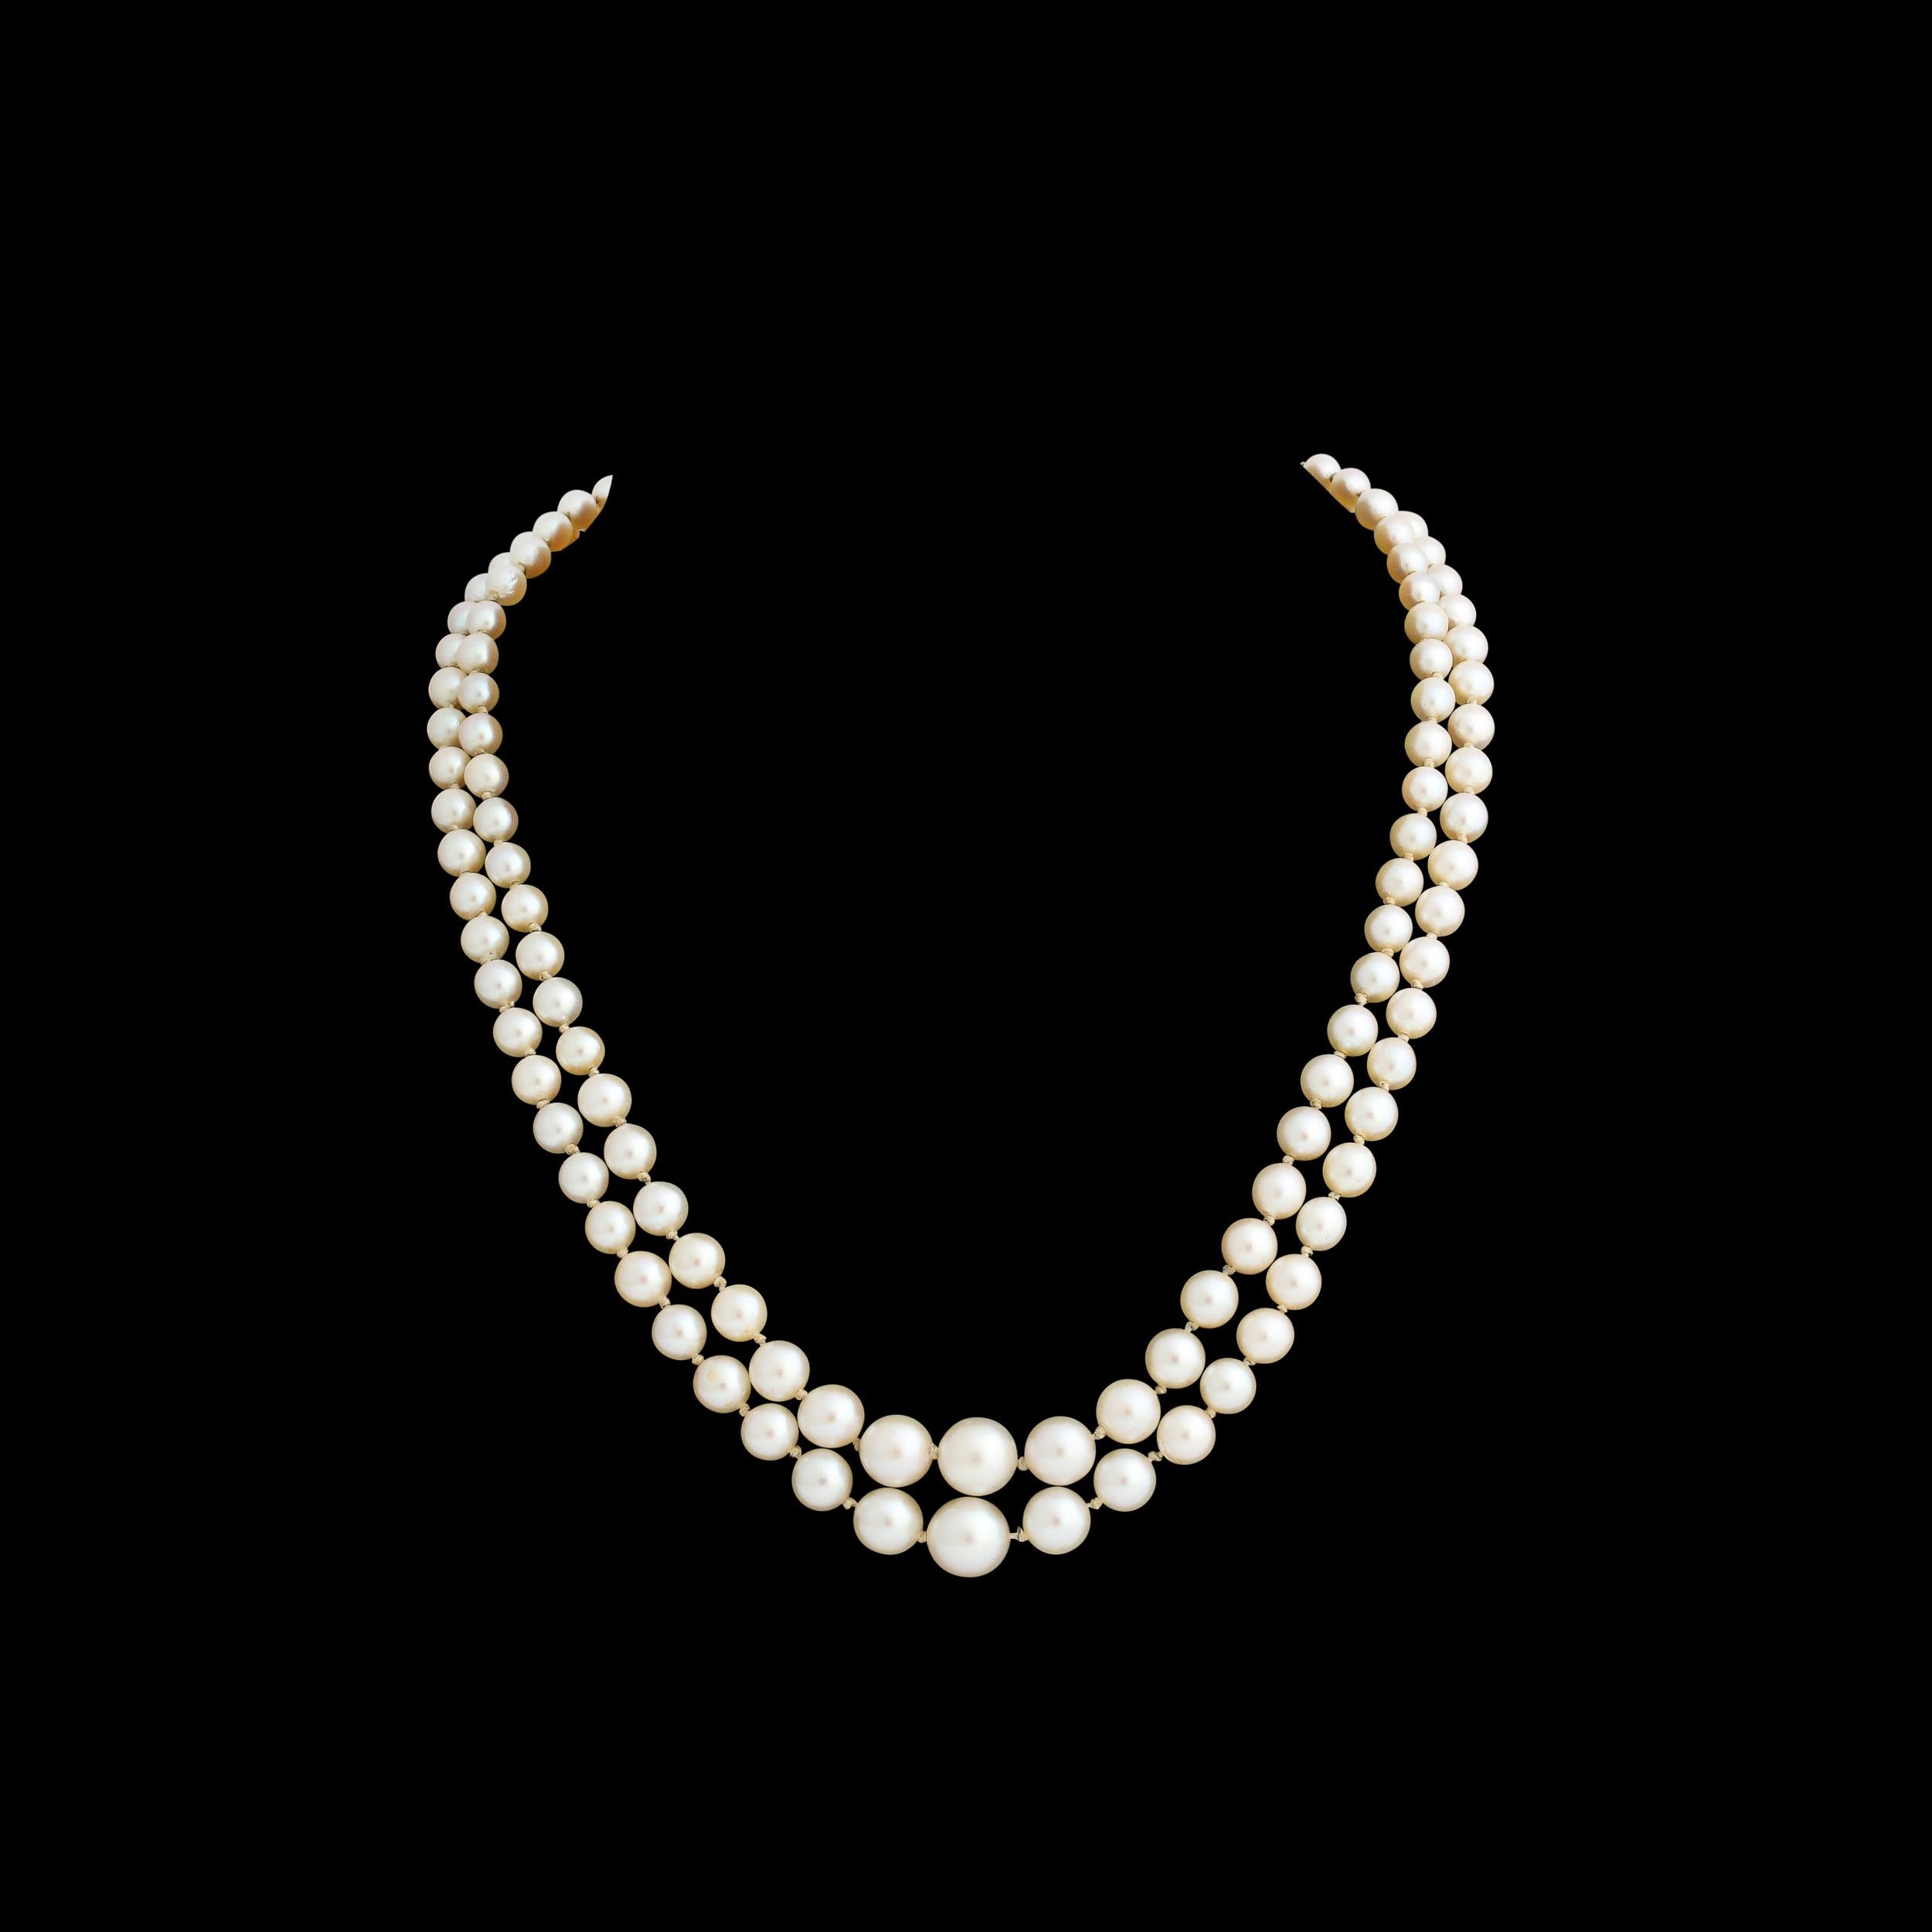 Neoclassical Mid Century Graduated Double Strand Pearl Necklace with 14k gold and Pearl Clasp